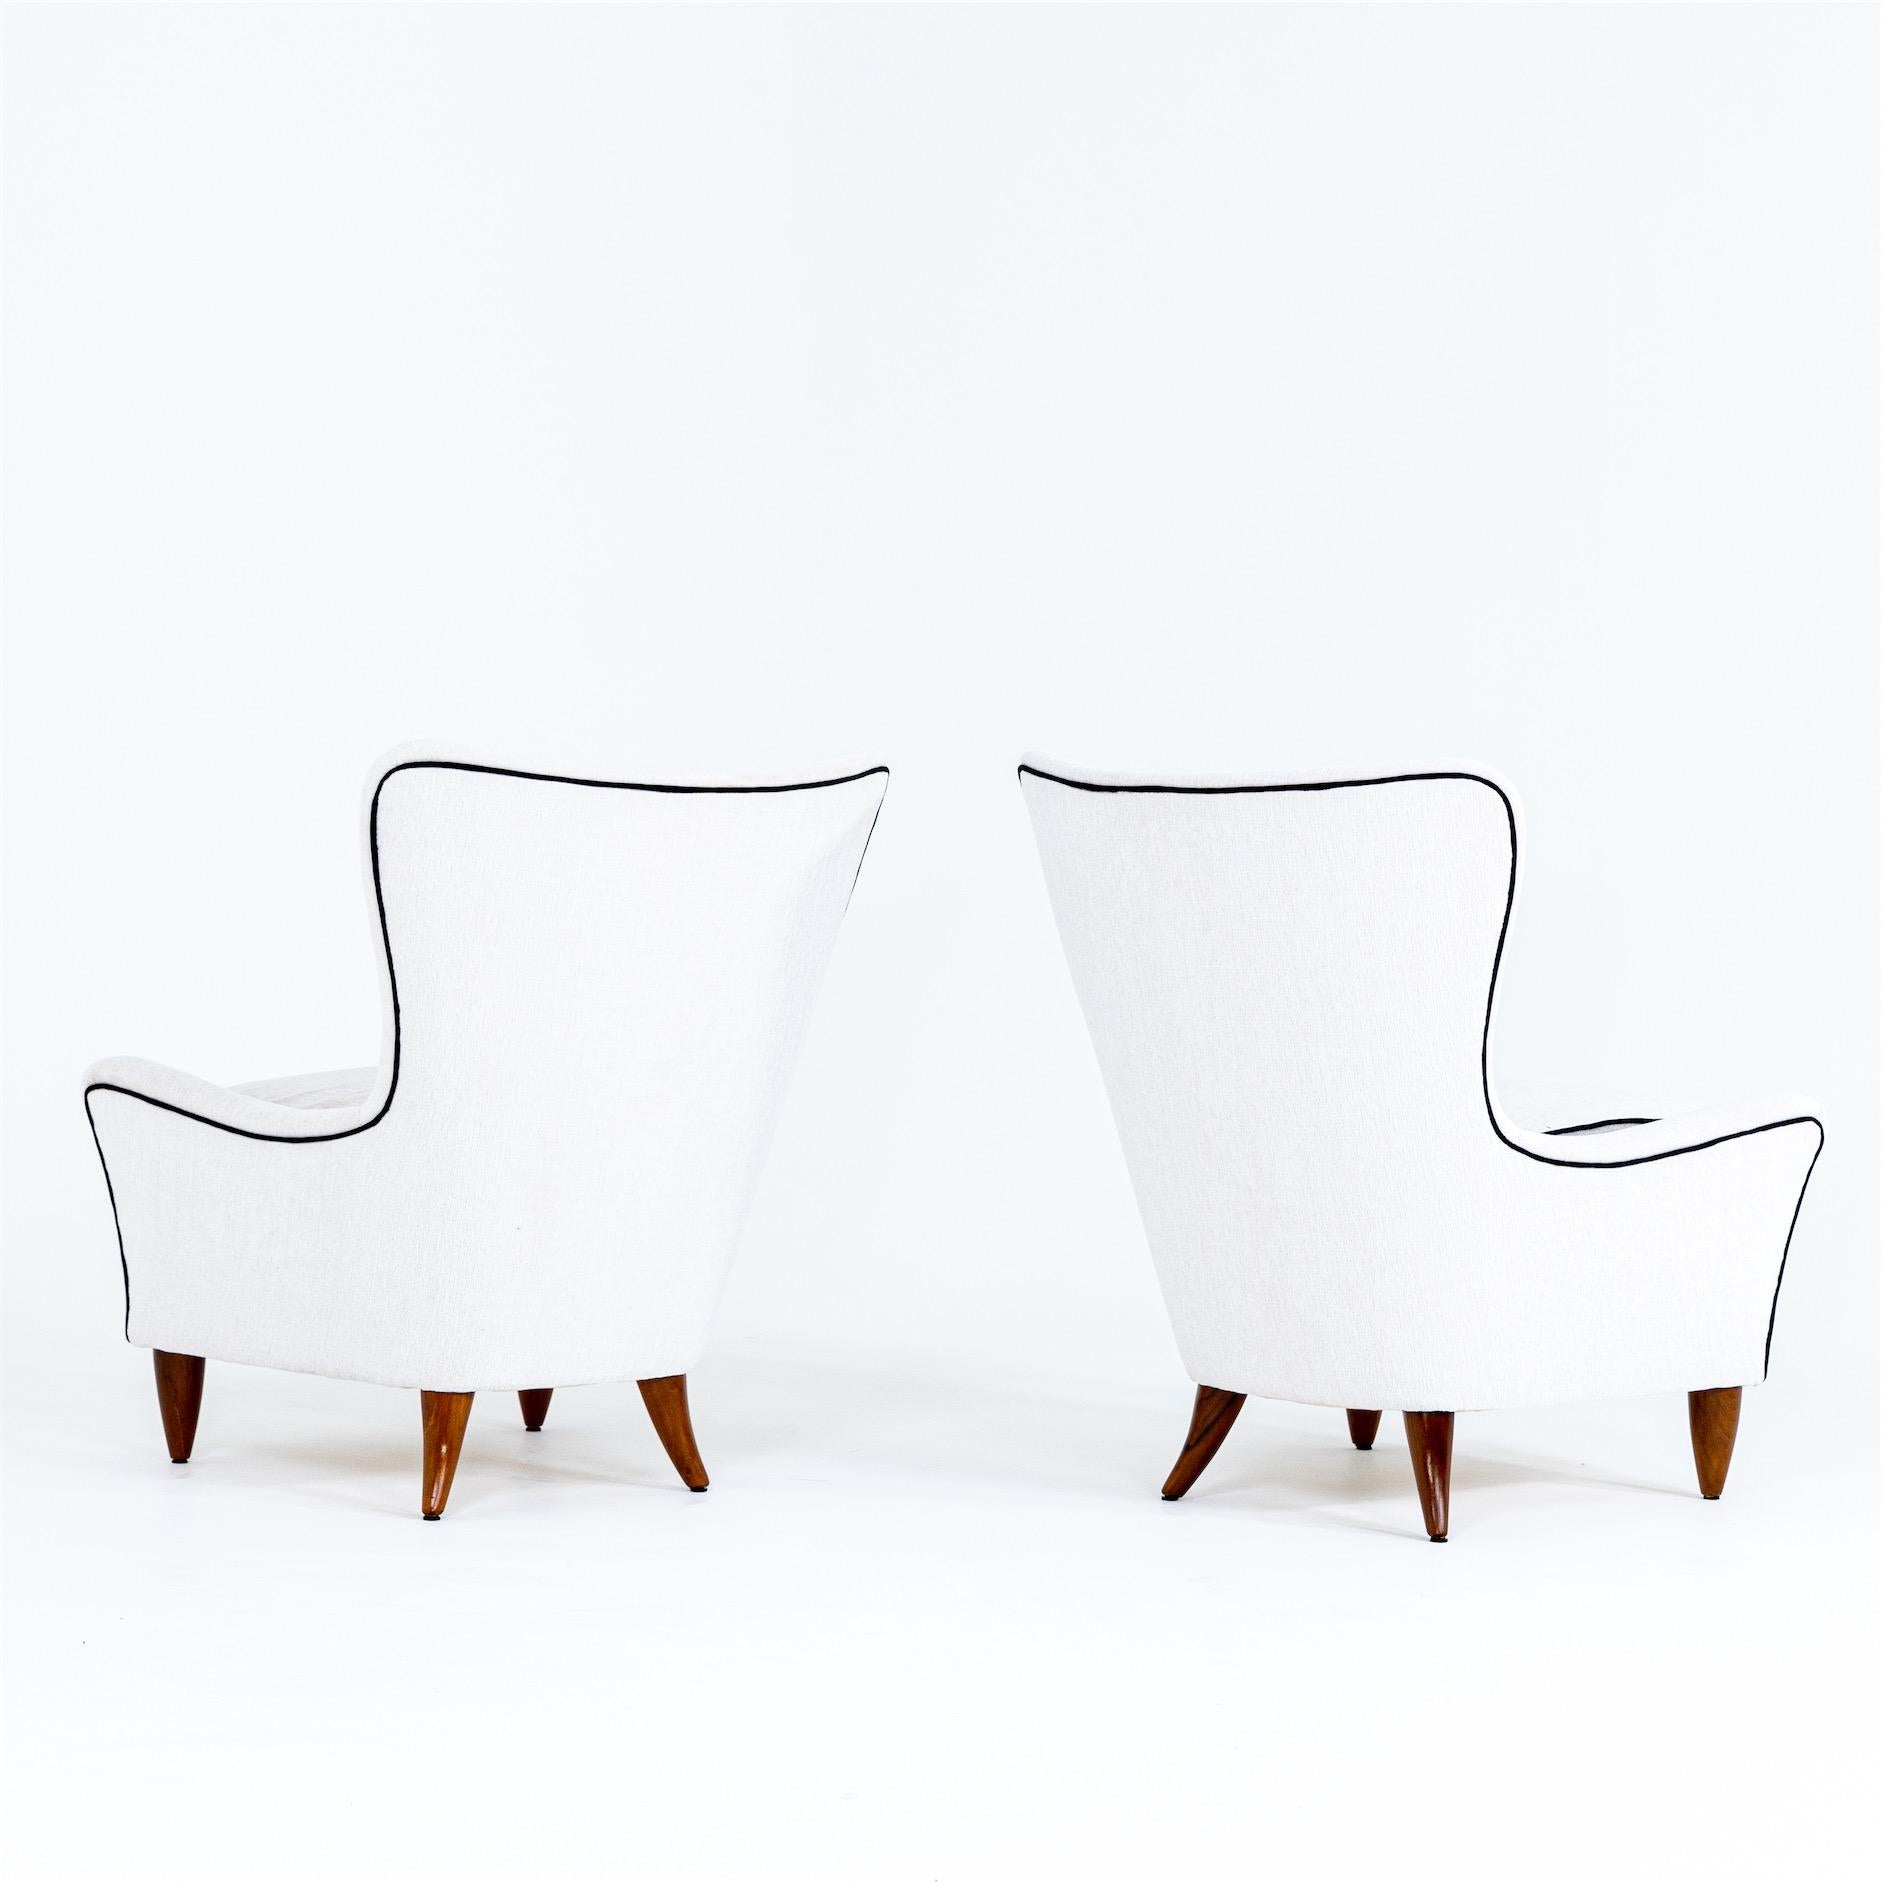 Lounge Chairs by Brambilla, Italy, 1950s For Sale 2